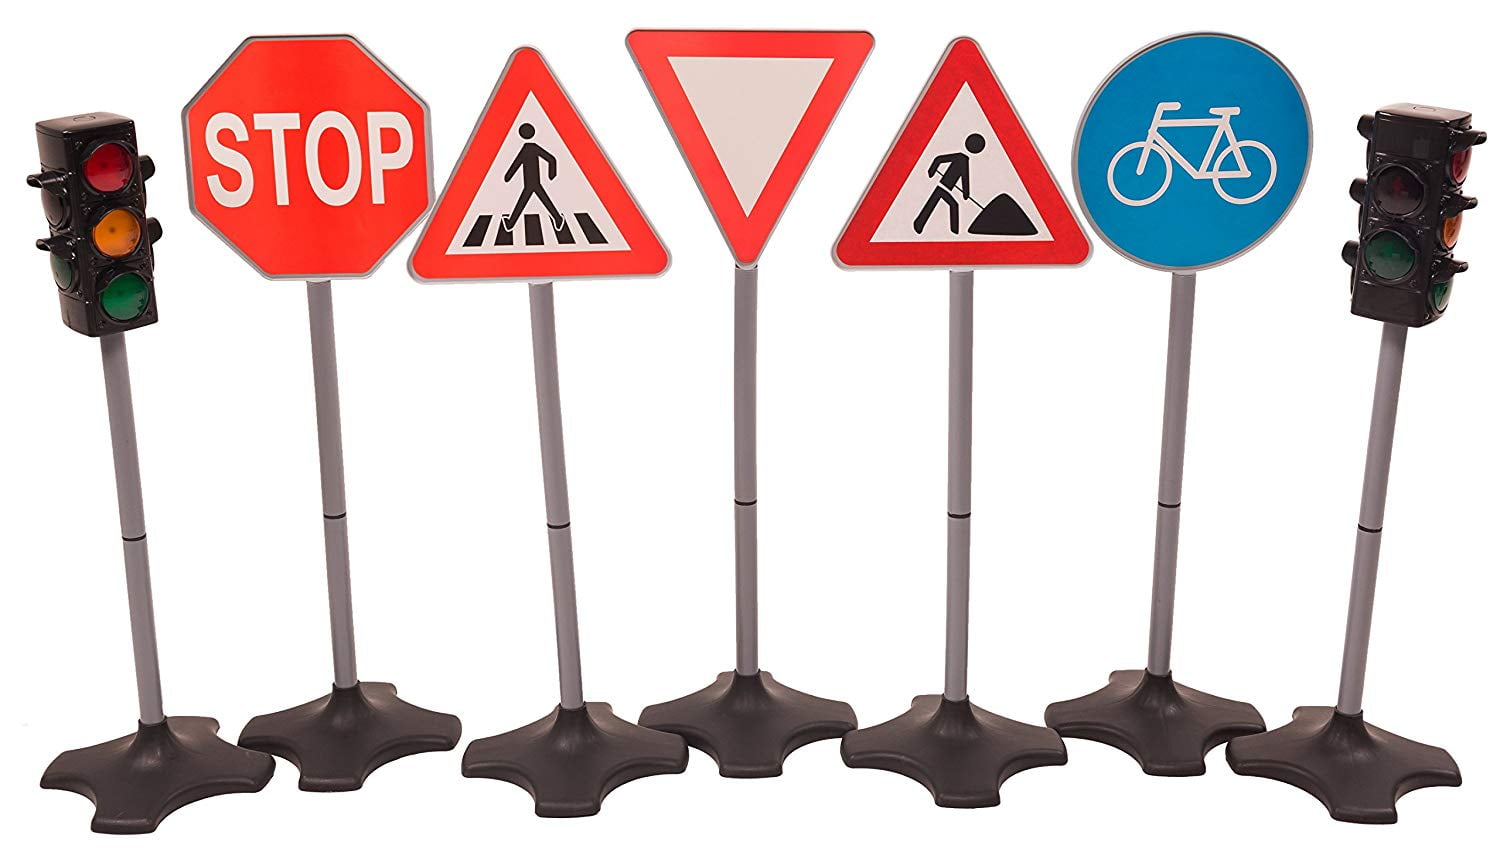 5 Road Signs